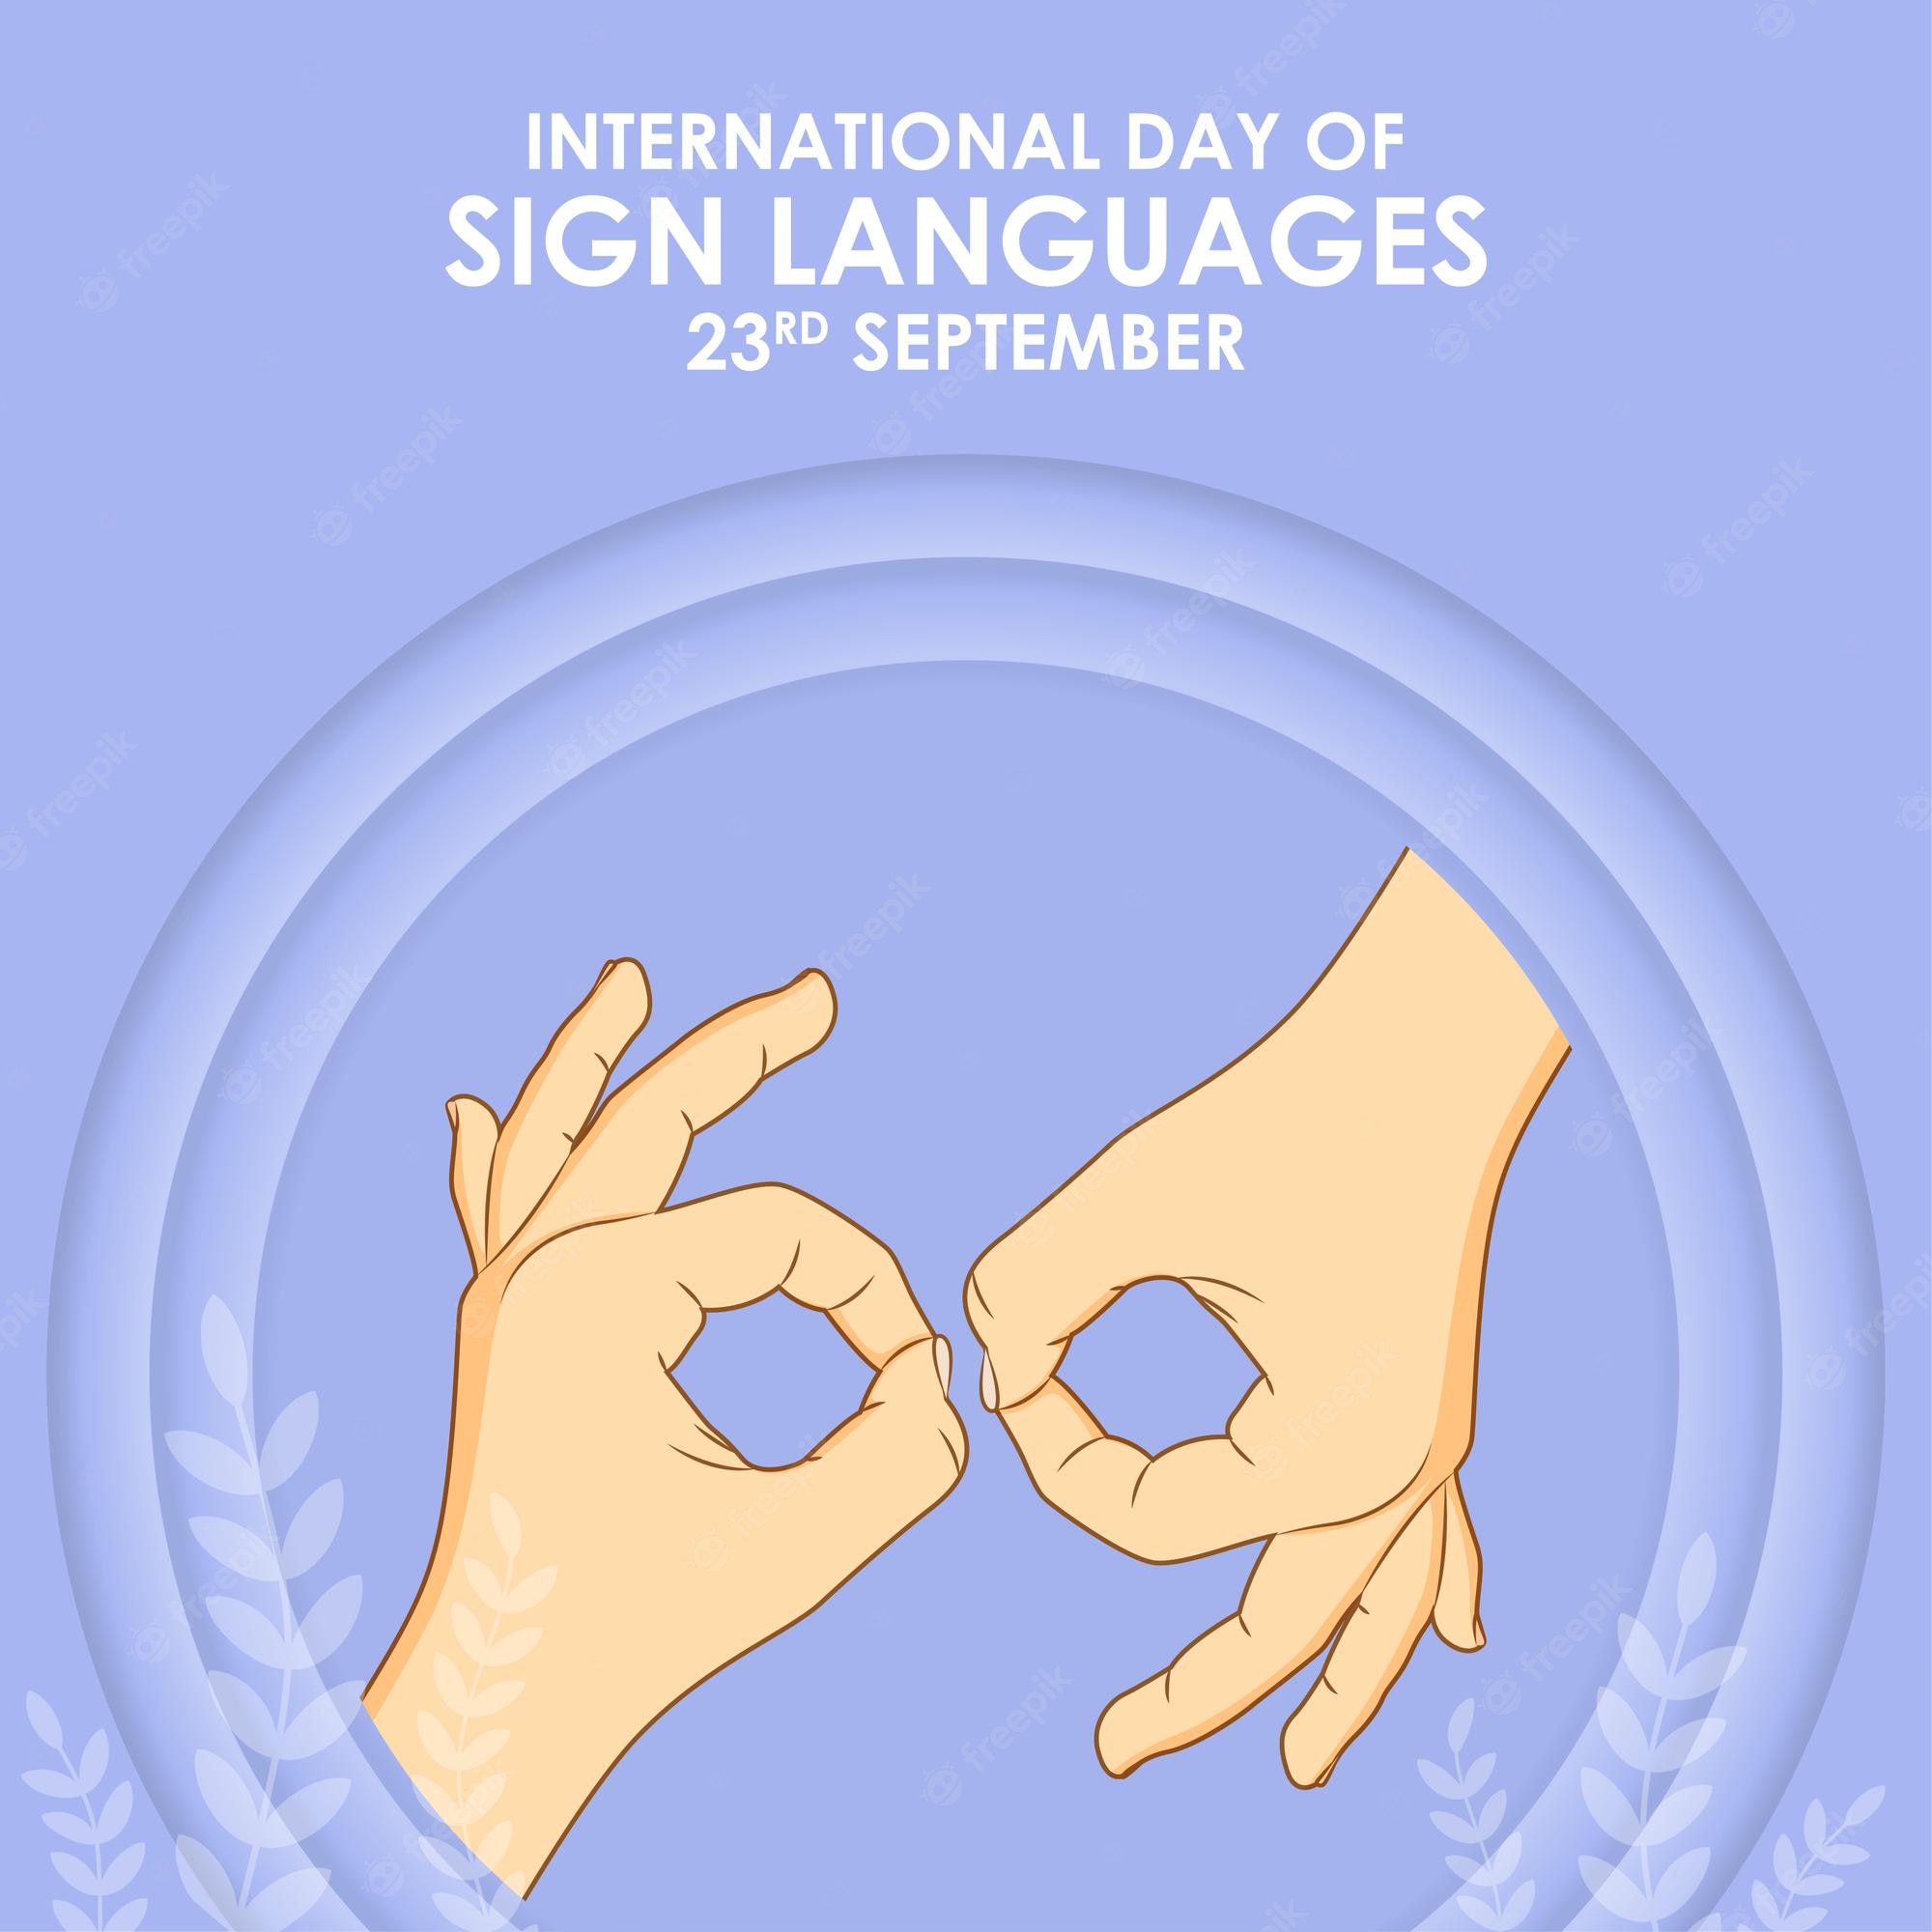 International Day of Sign Languages 2022 Theme: Quotes, Posters, Images, Wishes, Banners, and Slogans